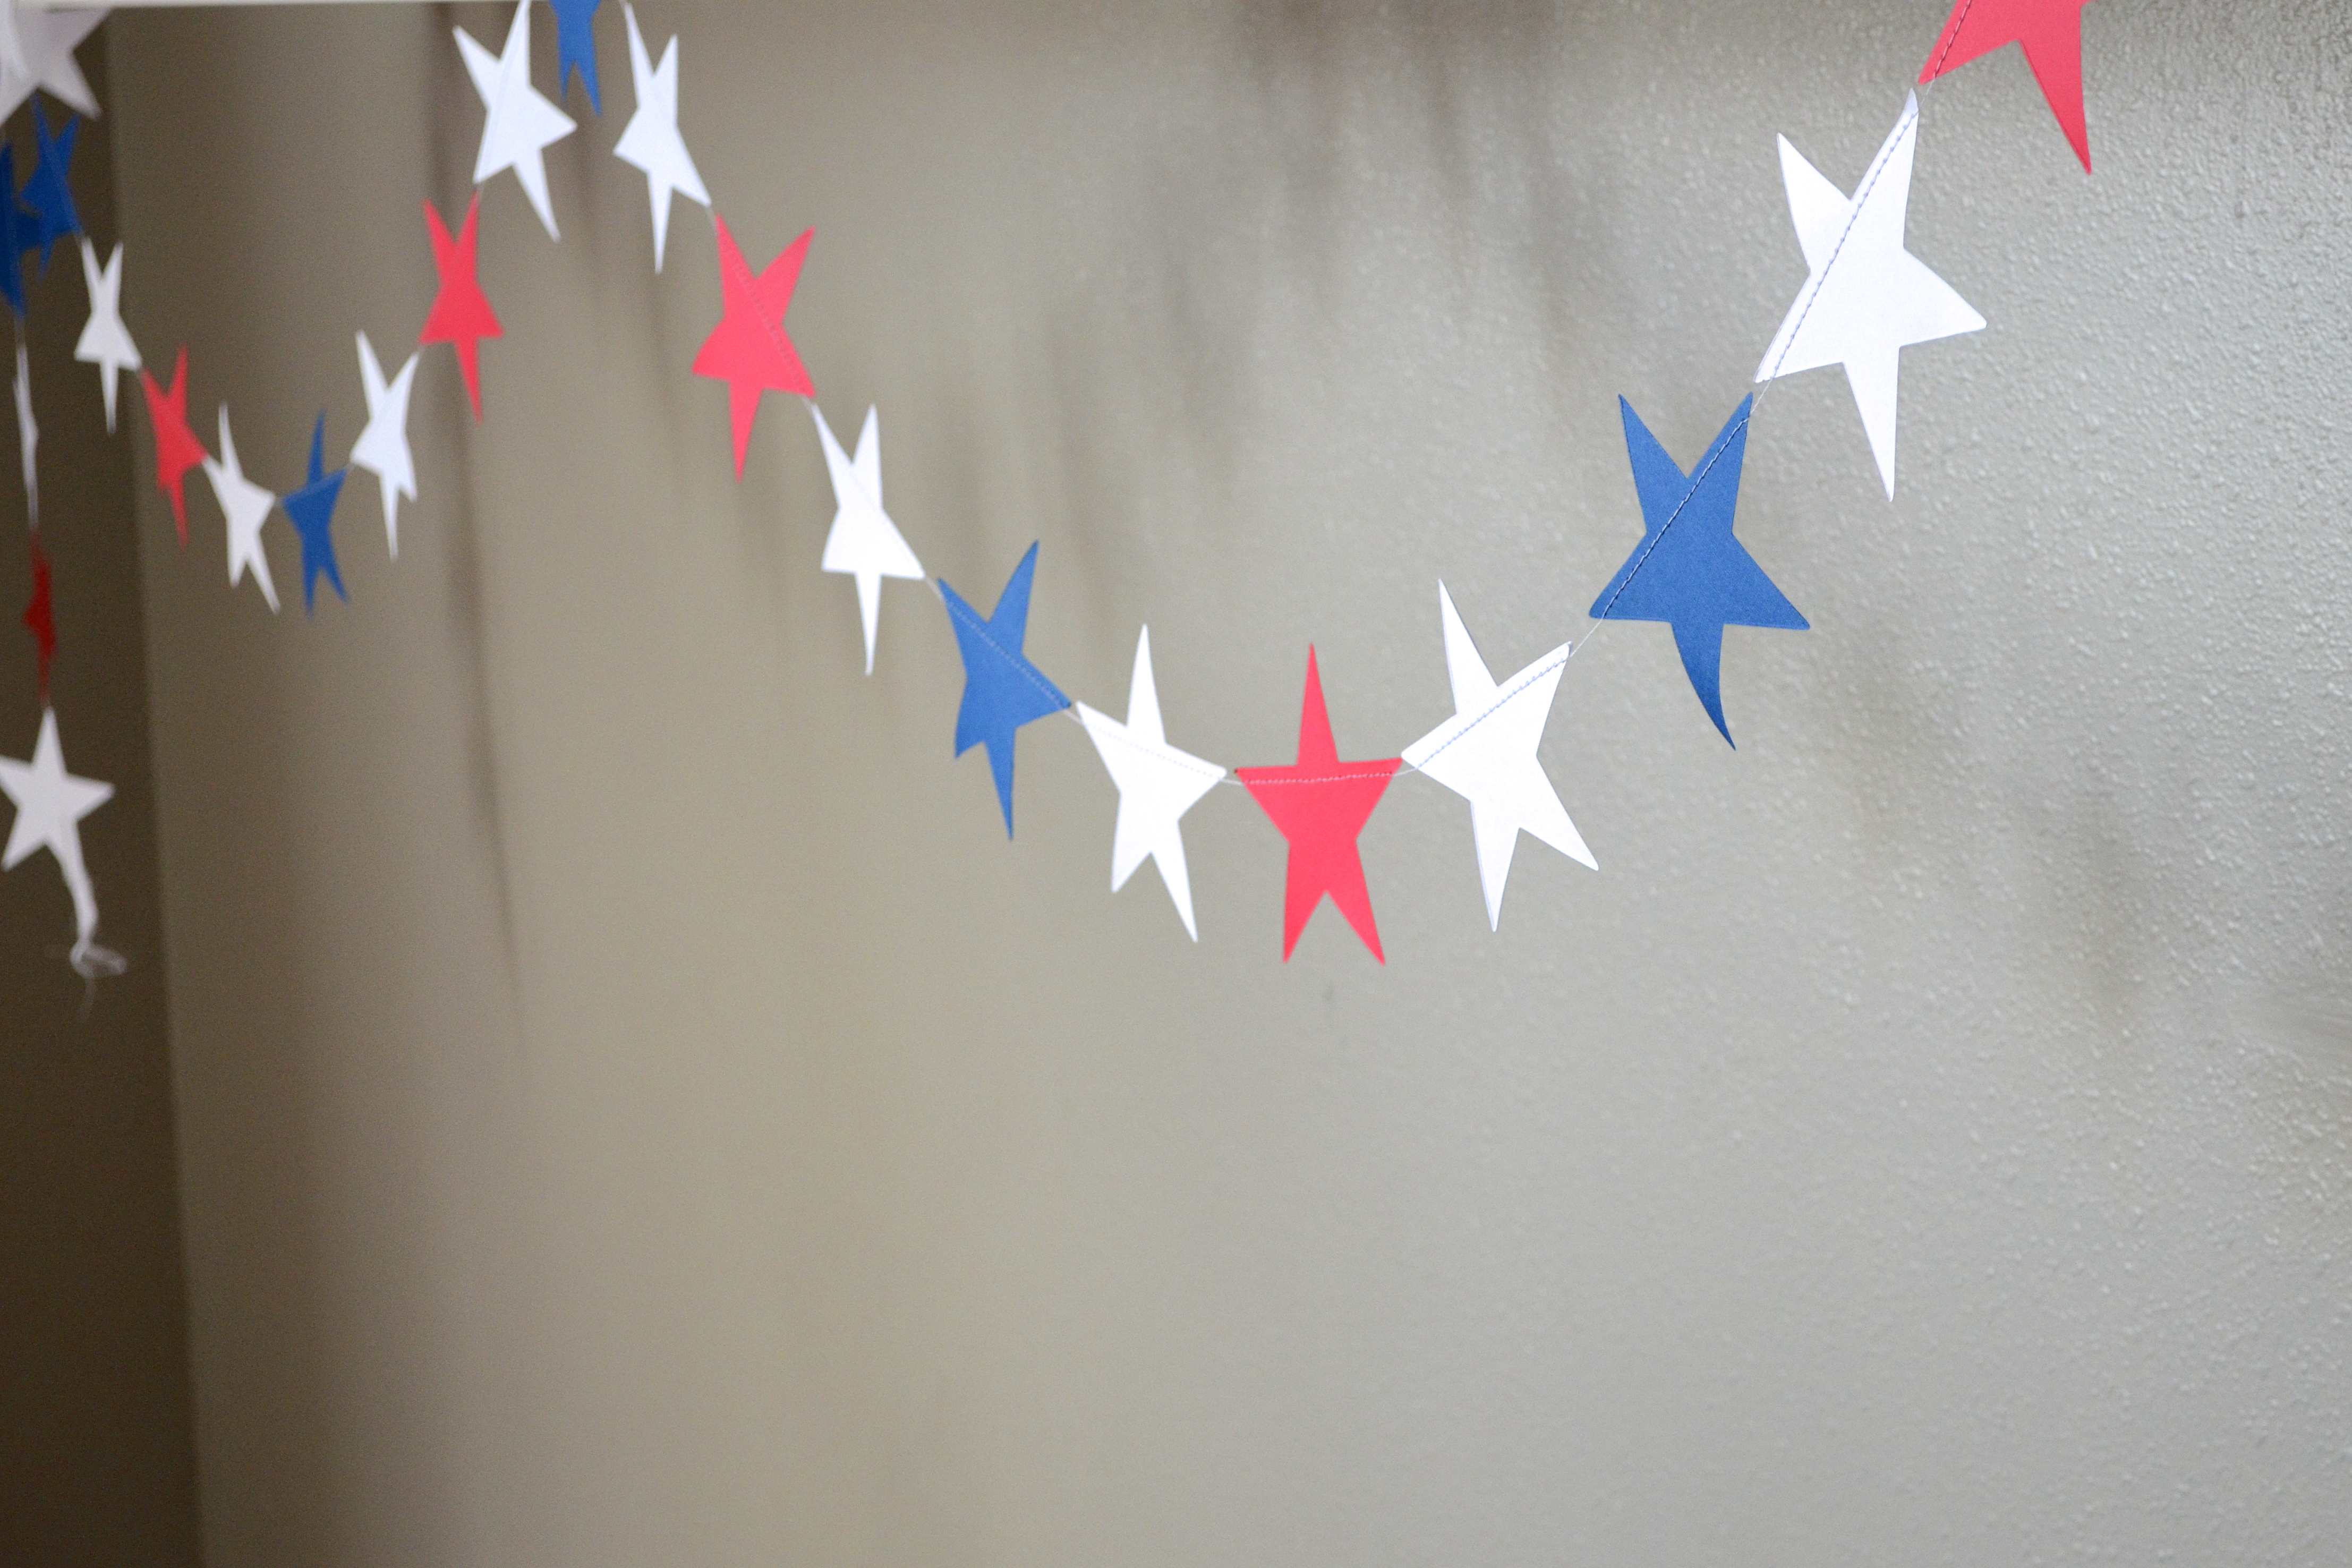 Extra Large Red, White and Blue Star Garland from the Path Less Traveled